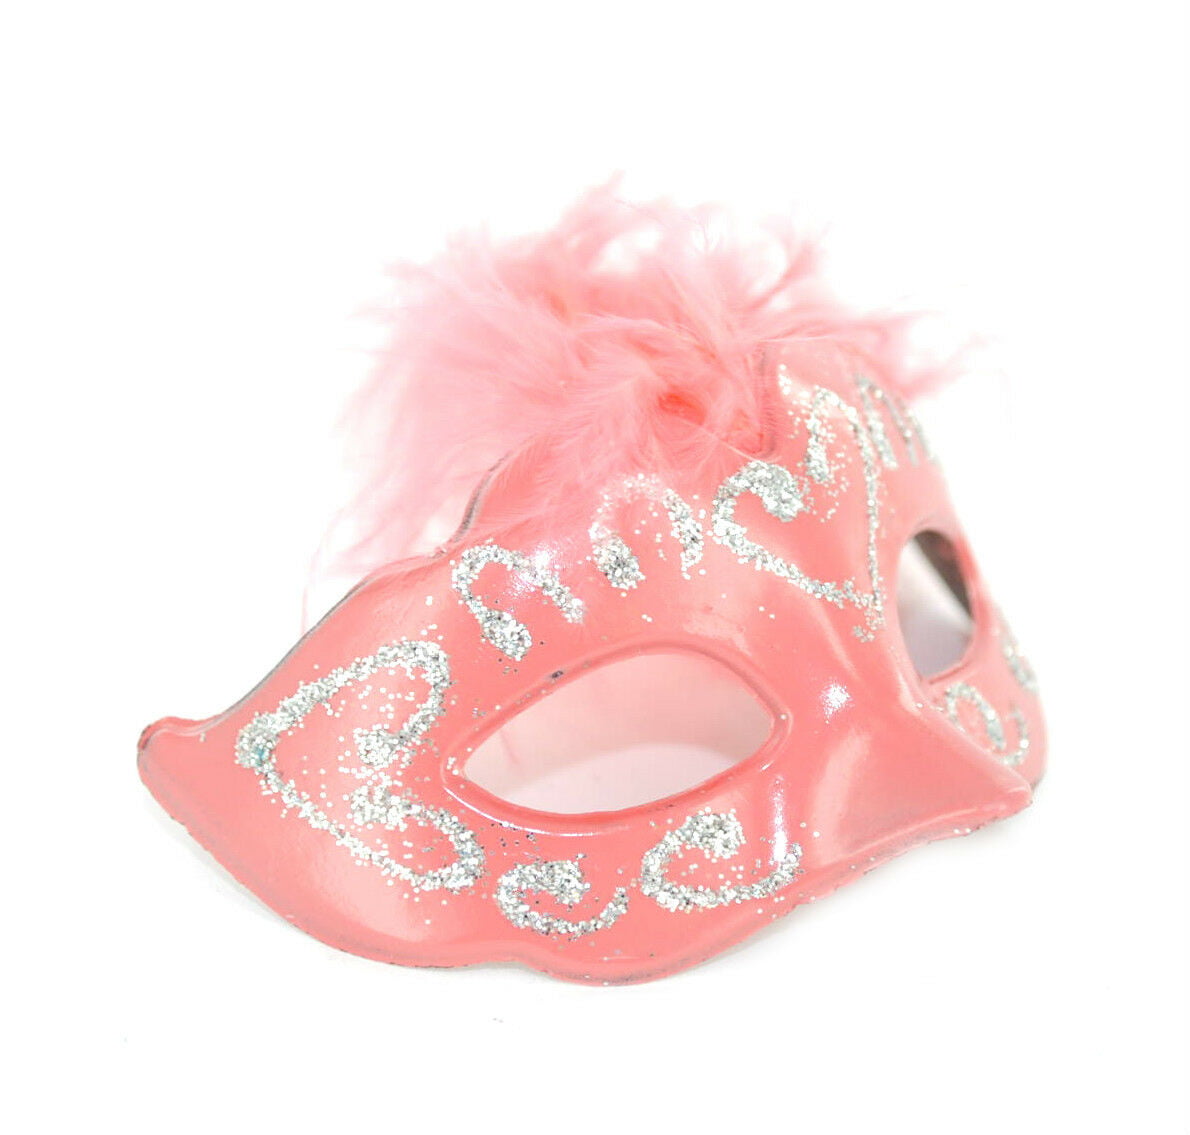 New Mini Feather Mask Venetian Masquerade Party Decoration Carnival Mardi  Gras Bar Prop Wedding Gift Mix Color On Sale From Calytao, $18.1